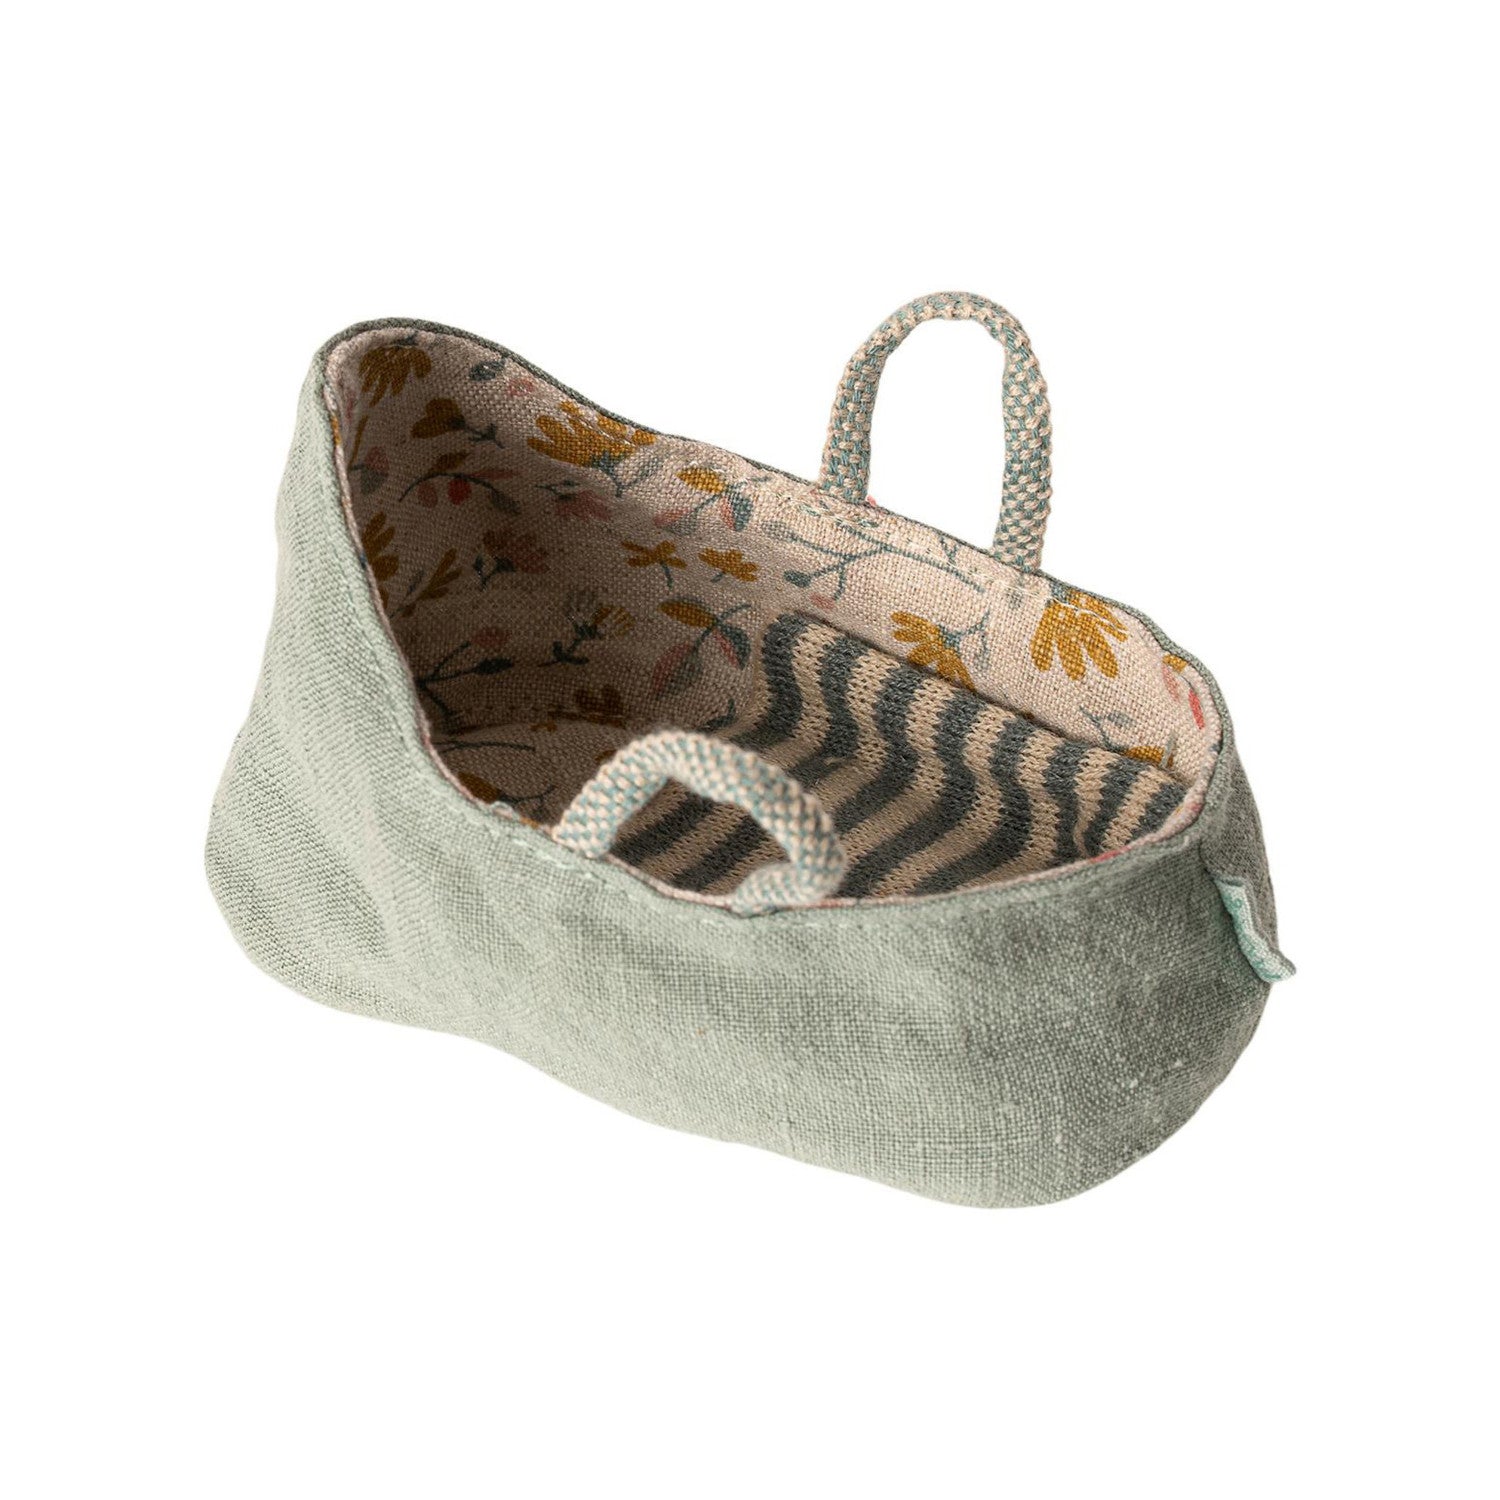 Maileg My sized fabric Carry cot